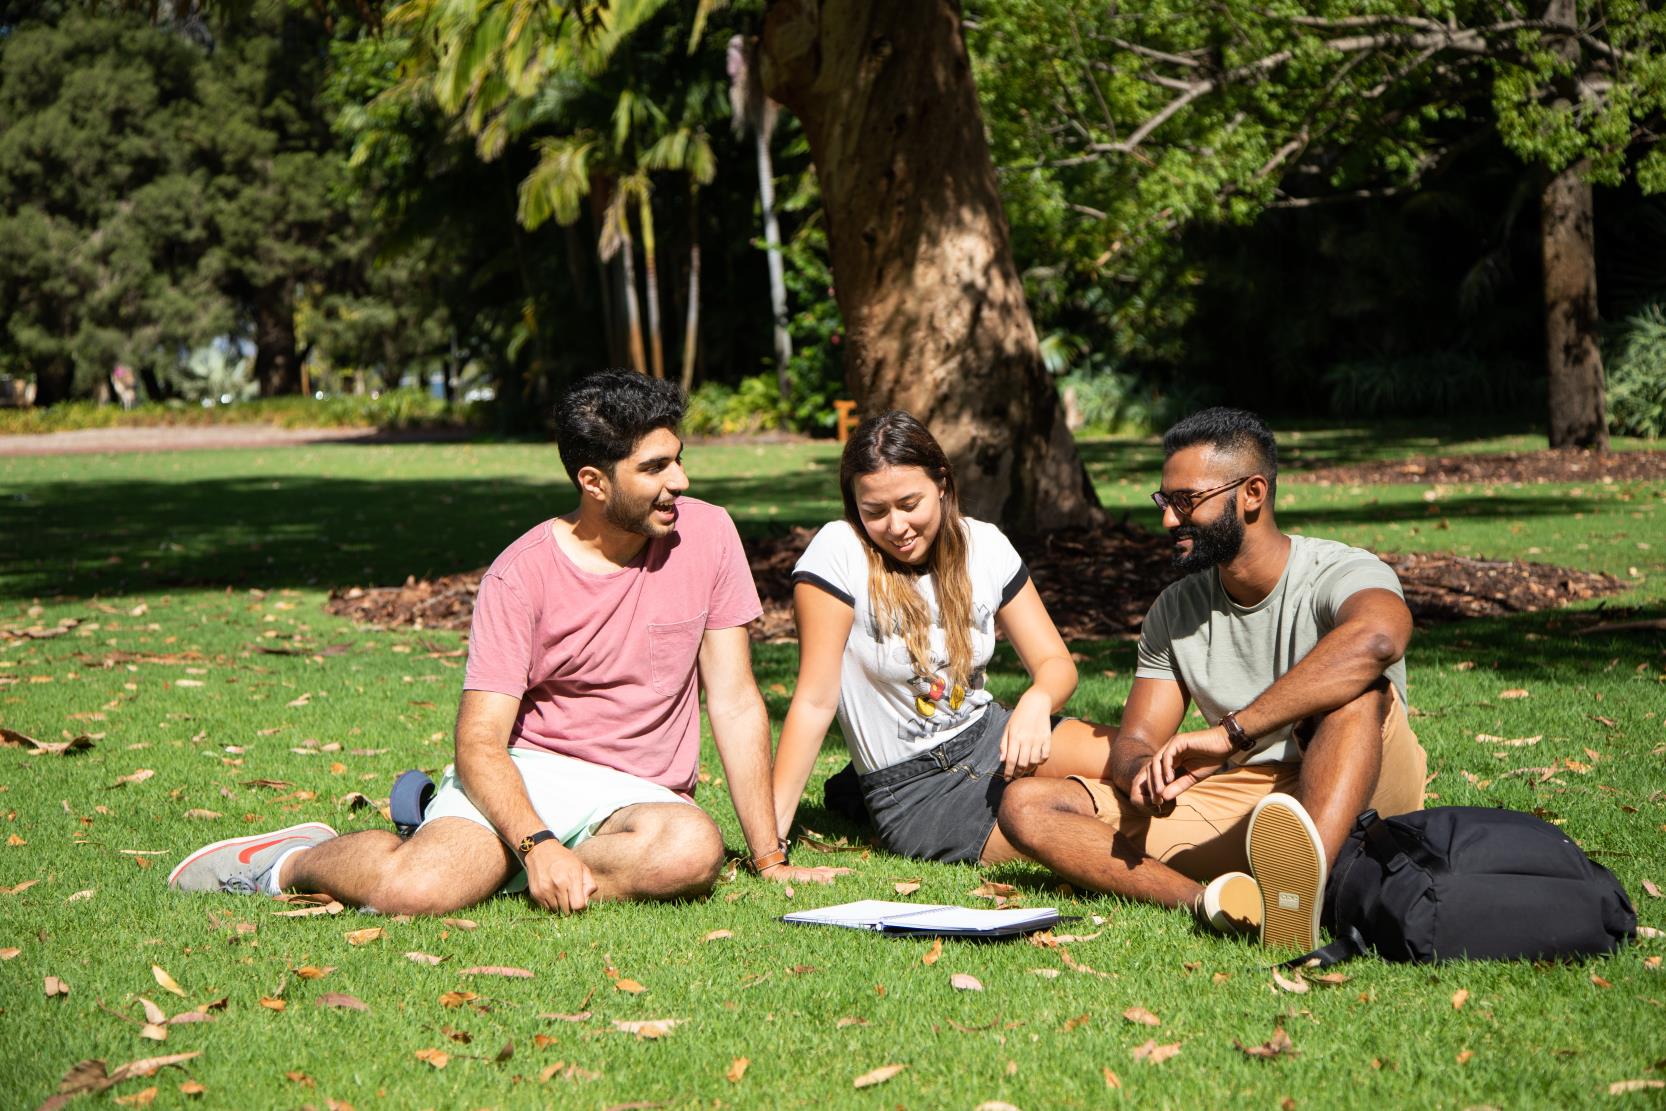 Two male students and a female student sit on the grass looking at a book